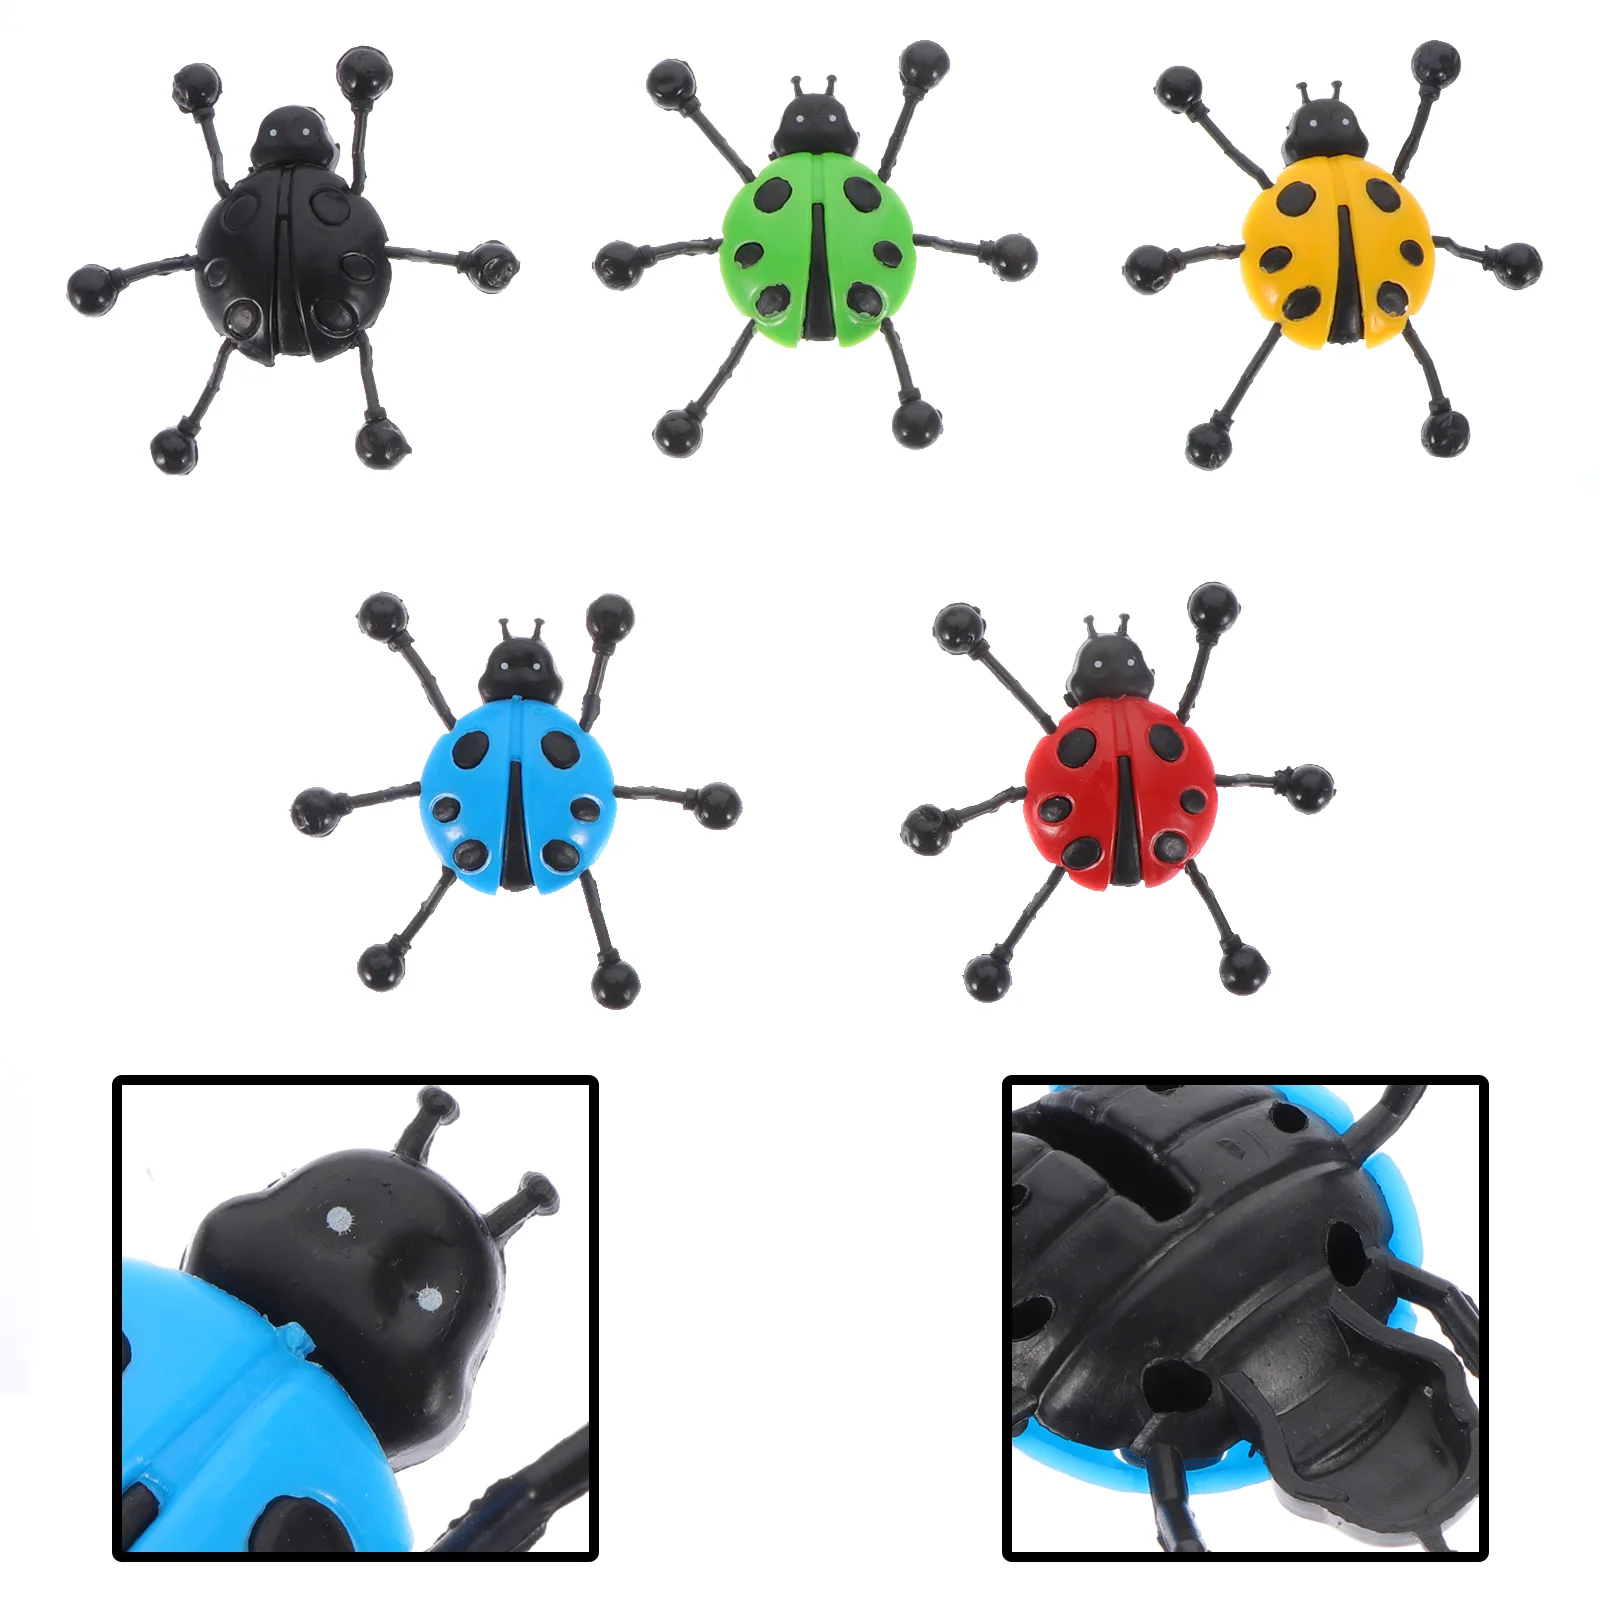 

Sticky Toy Toys Wall Stretchy Party Insect Favors Crawler Hands Climbers Climbing Window Crawlers Ladybug Ladybird Fidget